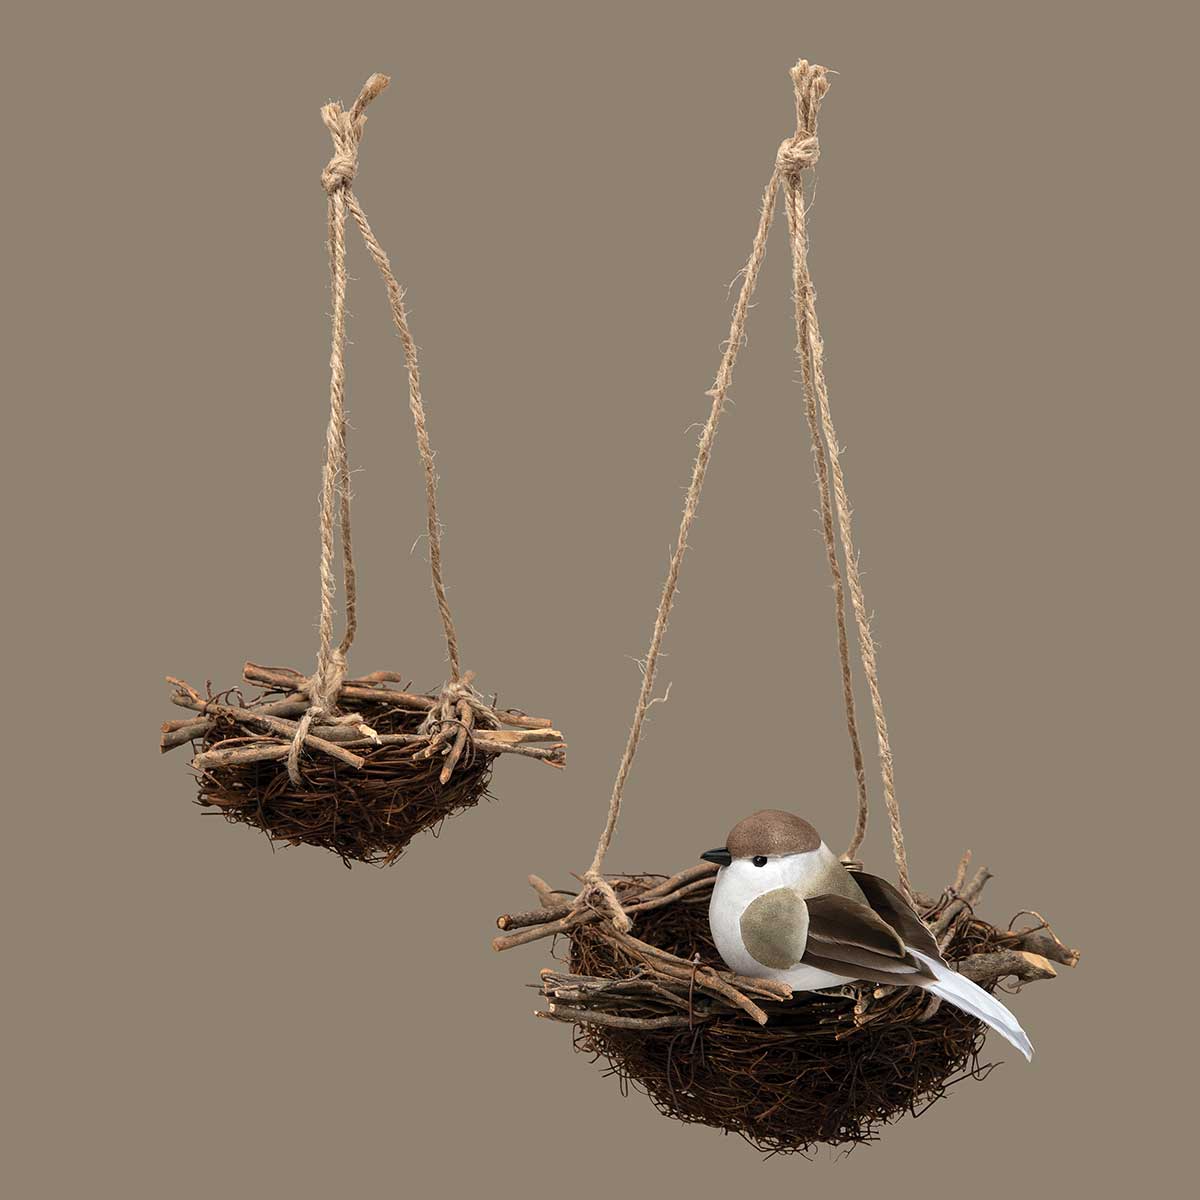 BIRD ROBIN 4IN X 1.75IN X 2IN BROWN/CREAM FEATHER/FOAM WITH CLIP